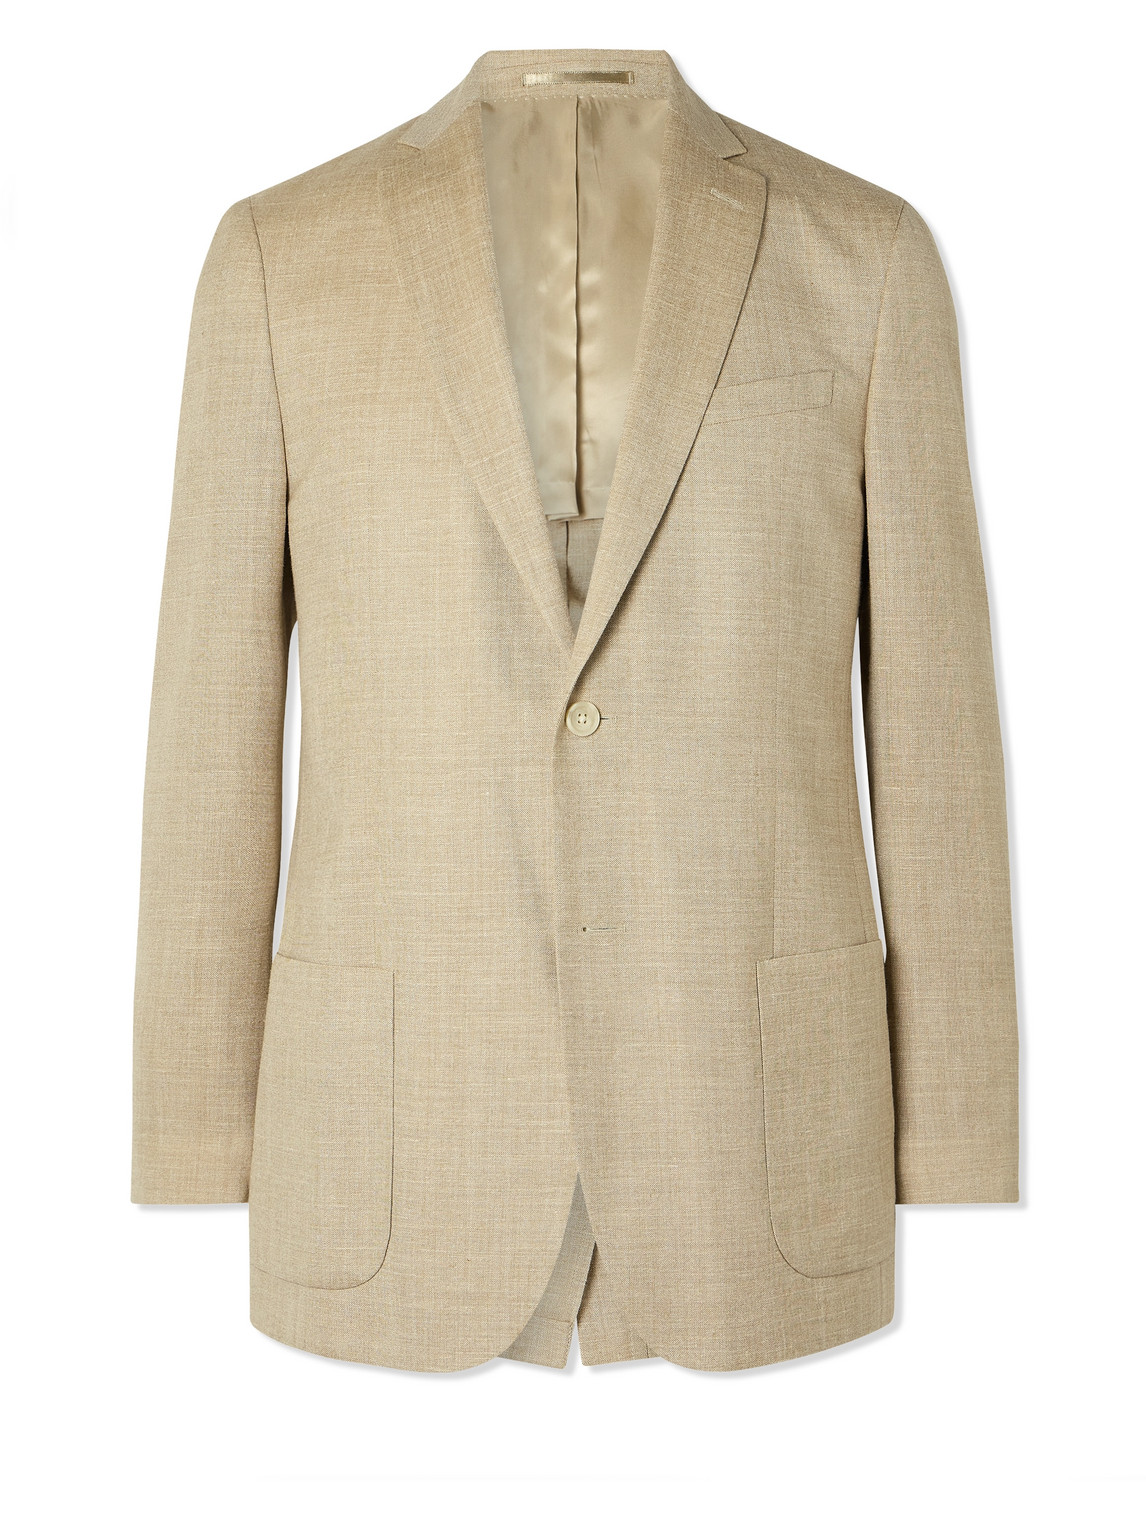 Mr P Wool, Silk And Linen-blend Suit Jacket In Neutrals